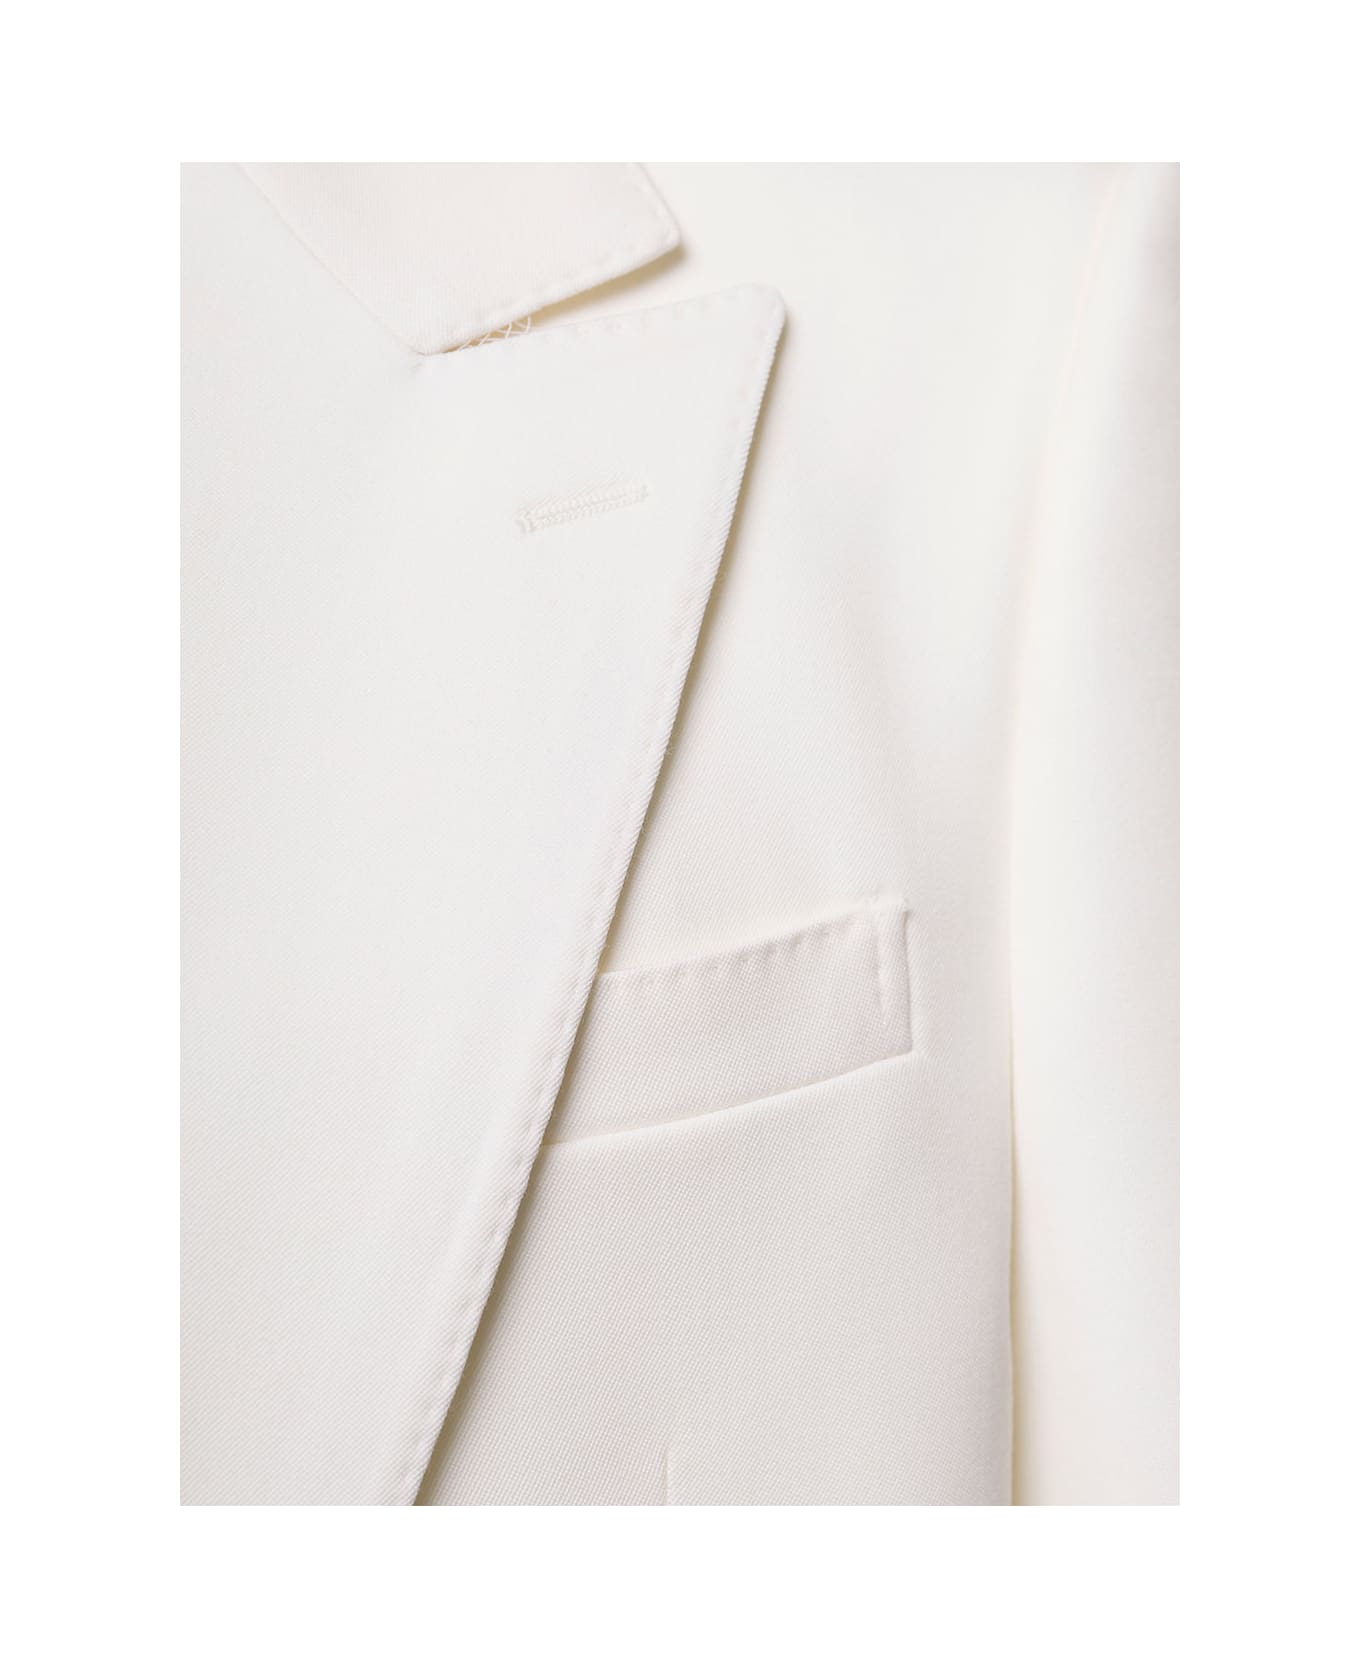 Alexander McQueen White Single-breasted Jacket With Notched Revers In Wool Woman - White